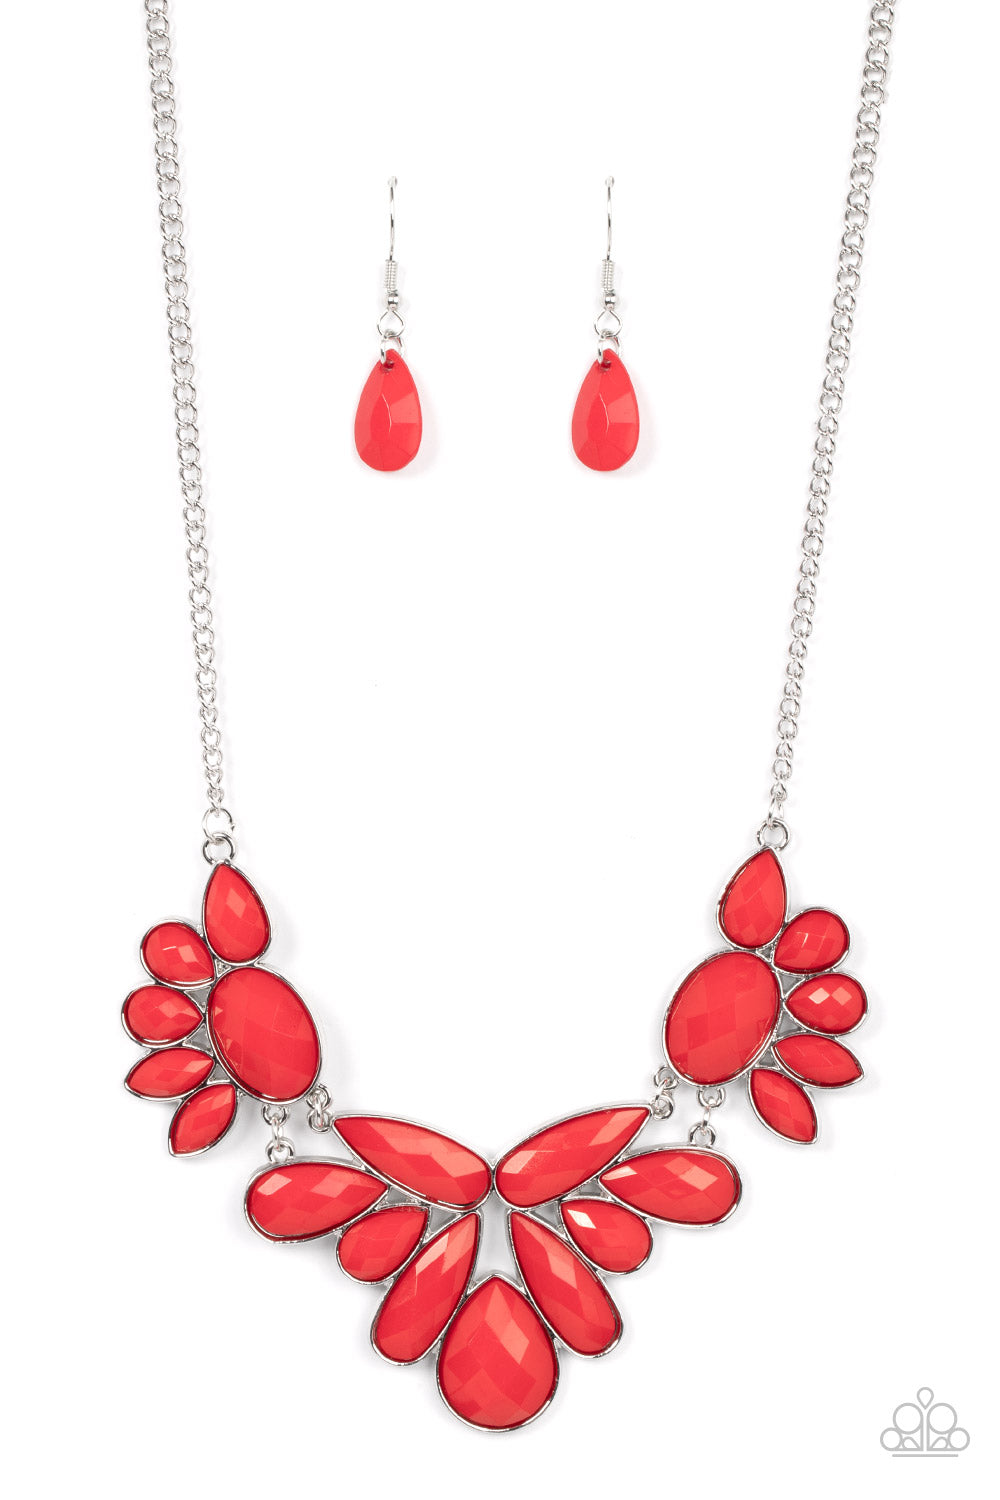 A Passing FAN-cy - Red Necklace - Paparazzi Accessories 